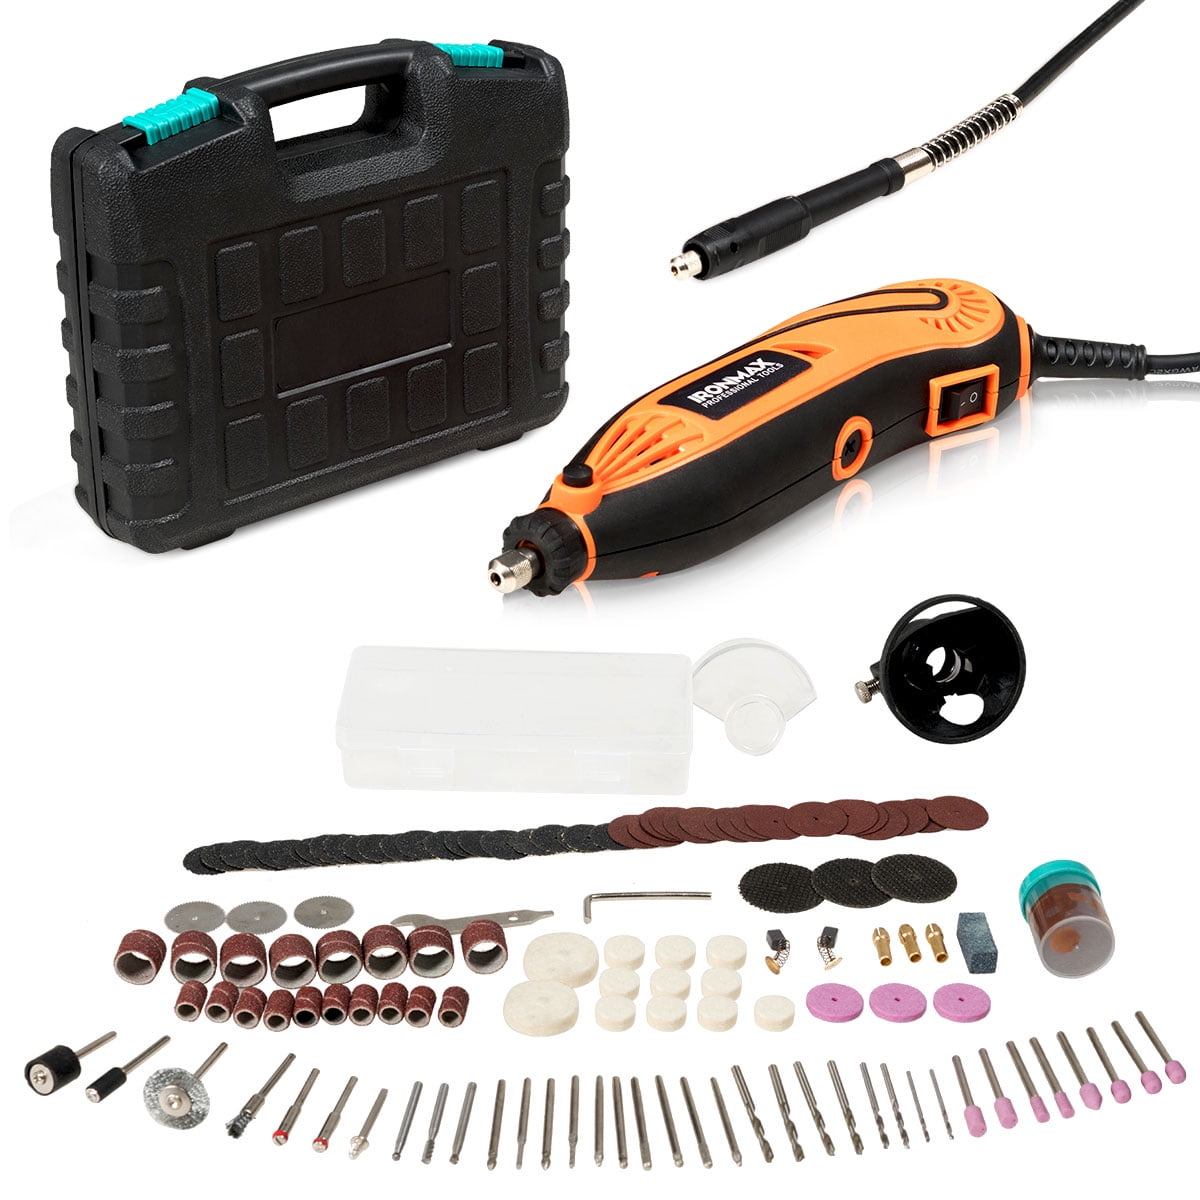 VEVOR Rotary Tool Kit, 5000-25000RPM Variable Speed Cordless Rotary Tool Kit  with A Universal Chuck, 5 Level Speeds, 118 PCS Accessories for Grinding,  Sanding, Milling, Carving, Cutting and Polishing 